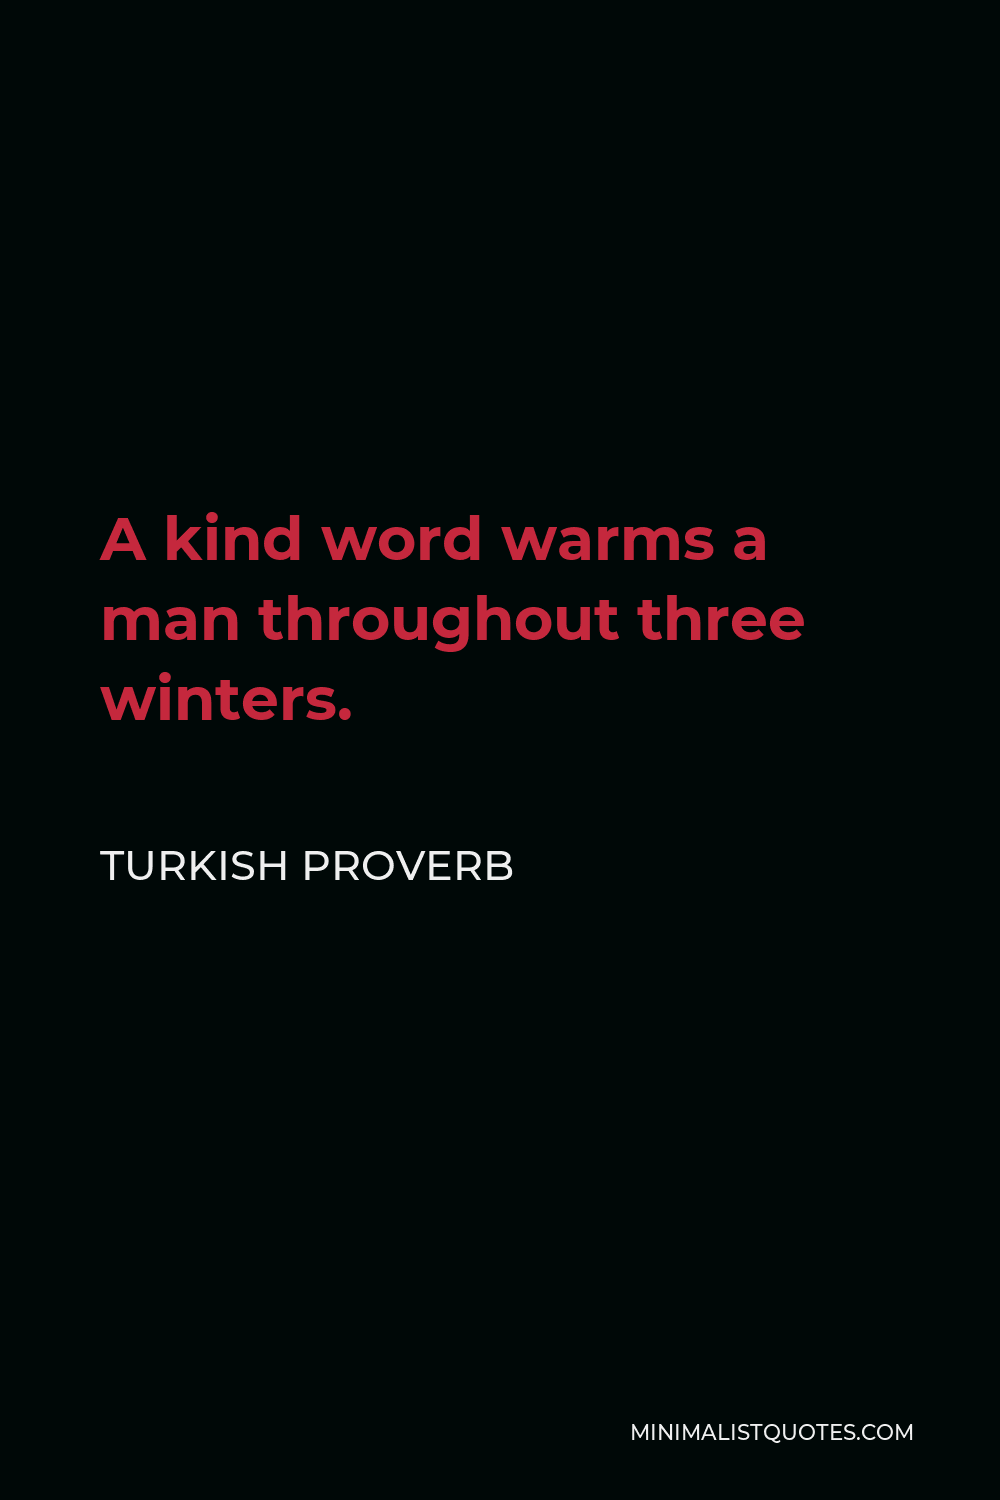 Turkish Proverb Quote - A kind word warms a man throughout three winters.